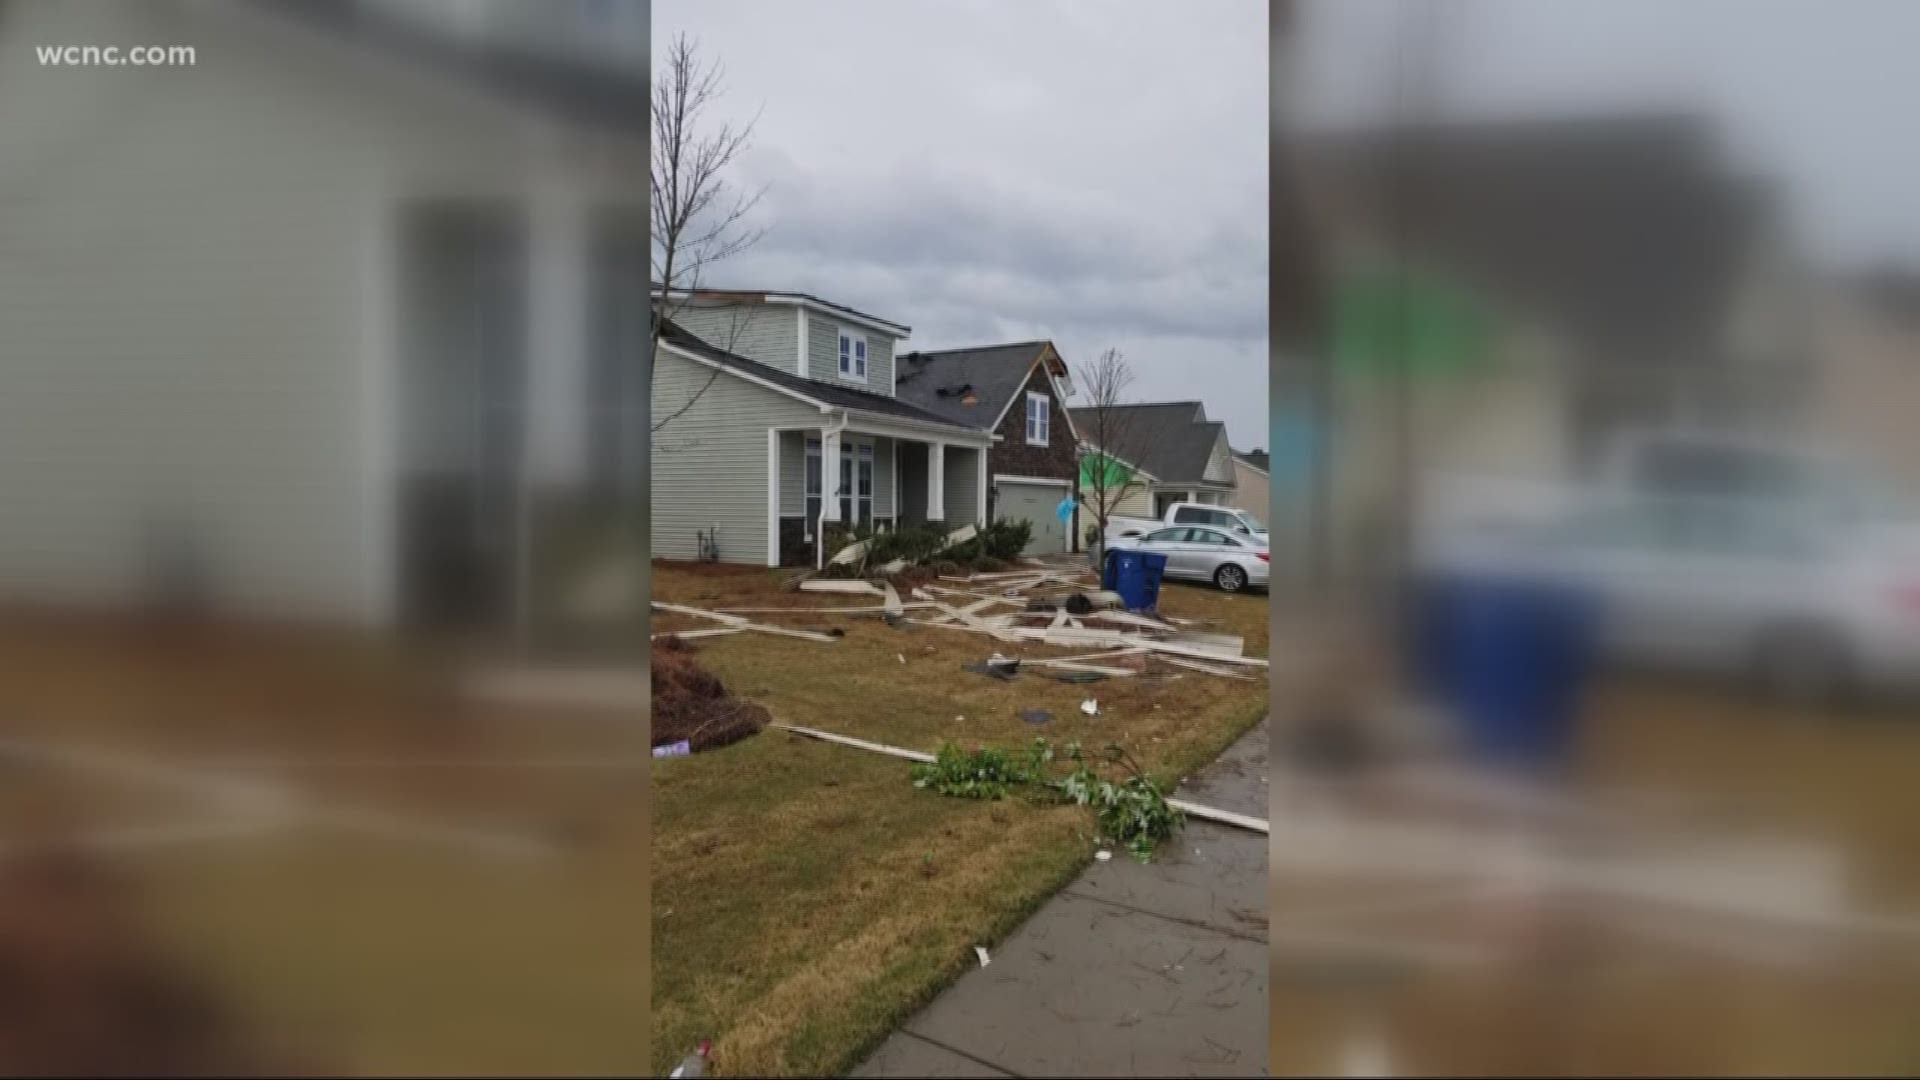 The National Weather Service will be surveying the Carolinas Monday to check for evidence of tornadoes.